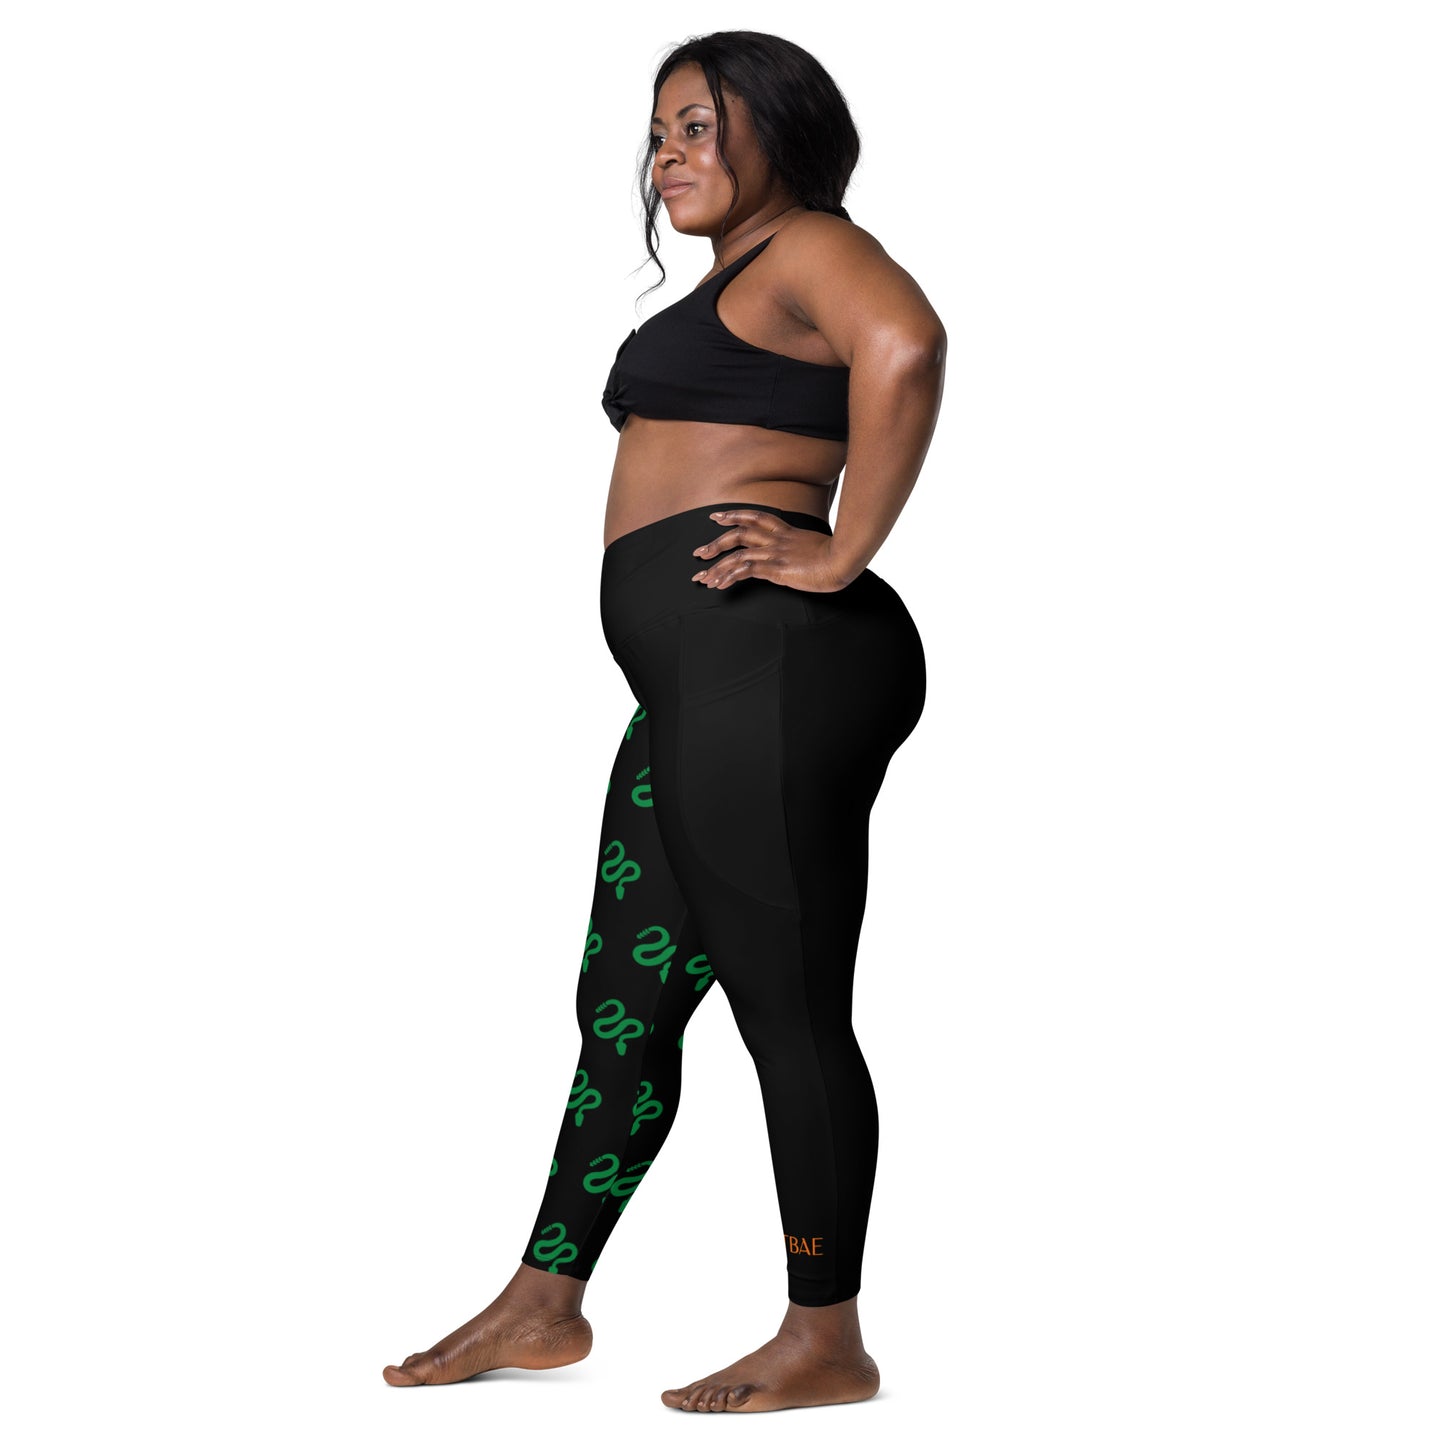 FITBAE Rattler Pride Crossover Leggings with Pockets